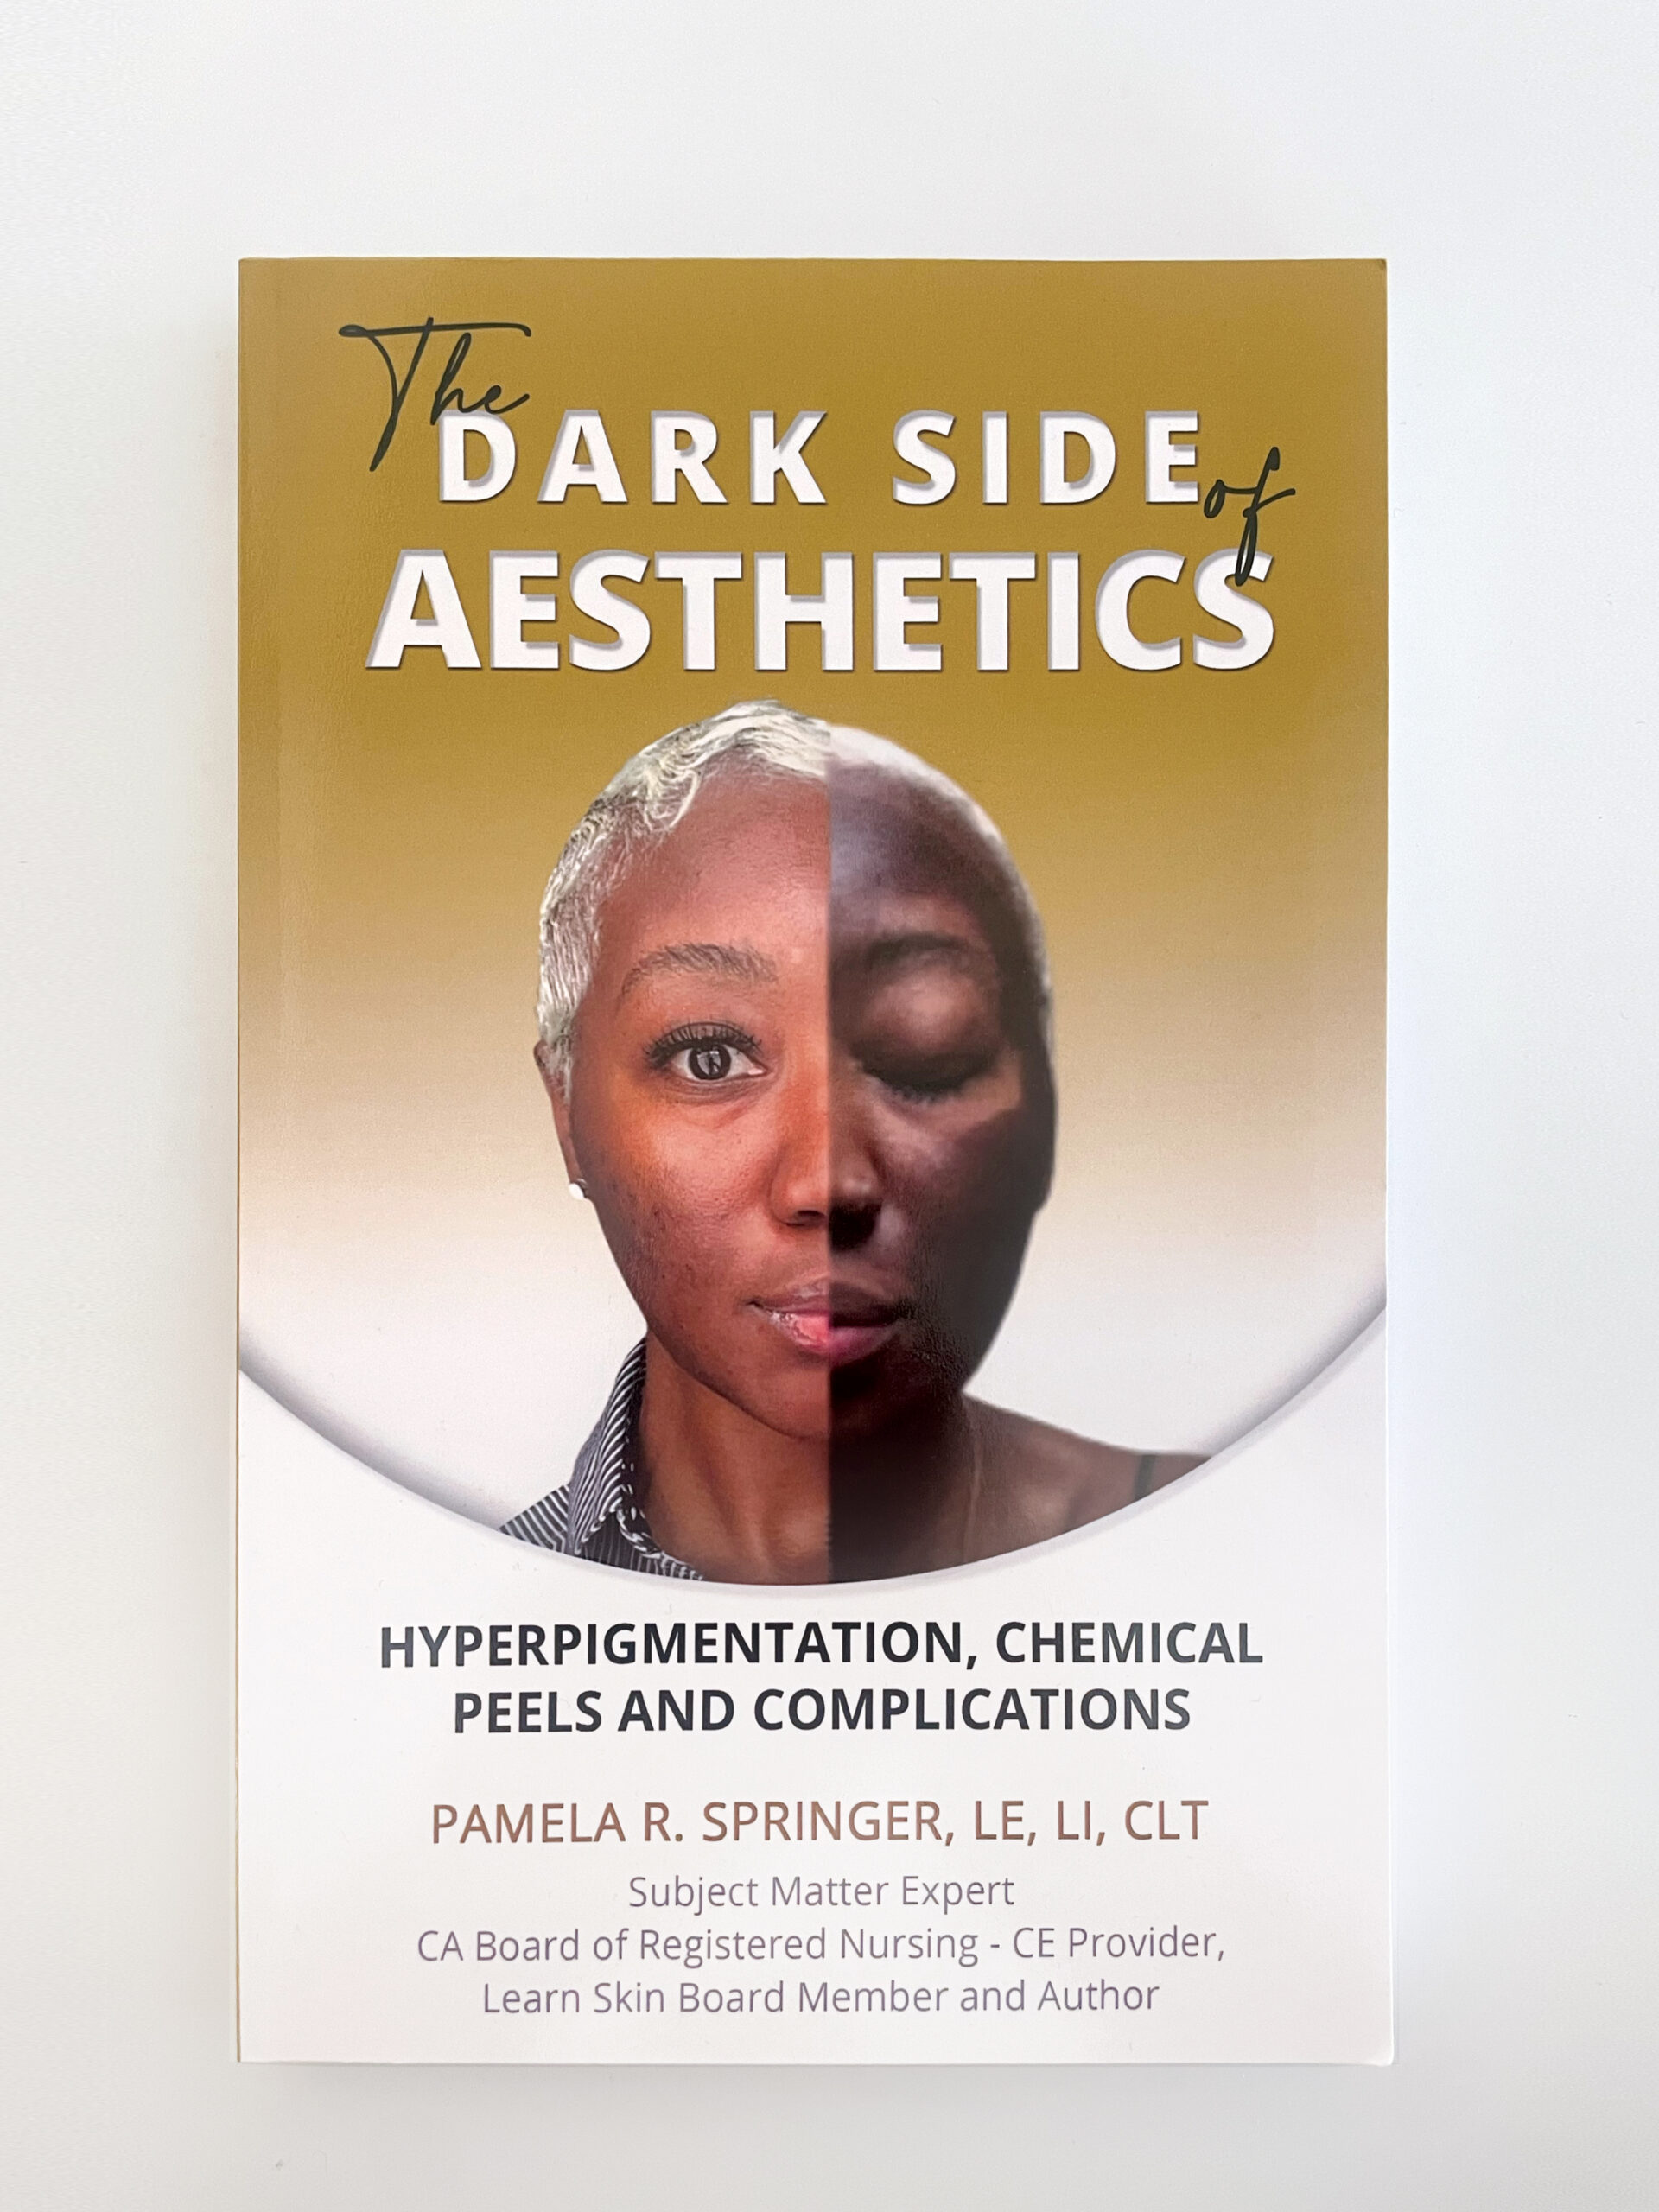 The Dark Side of Aesthetics book cover discussing common ethnic skin conditions and challenging risk factors today's skincare professional should know.